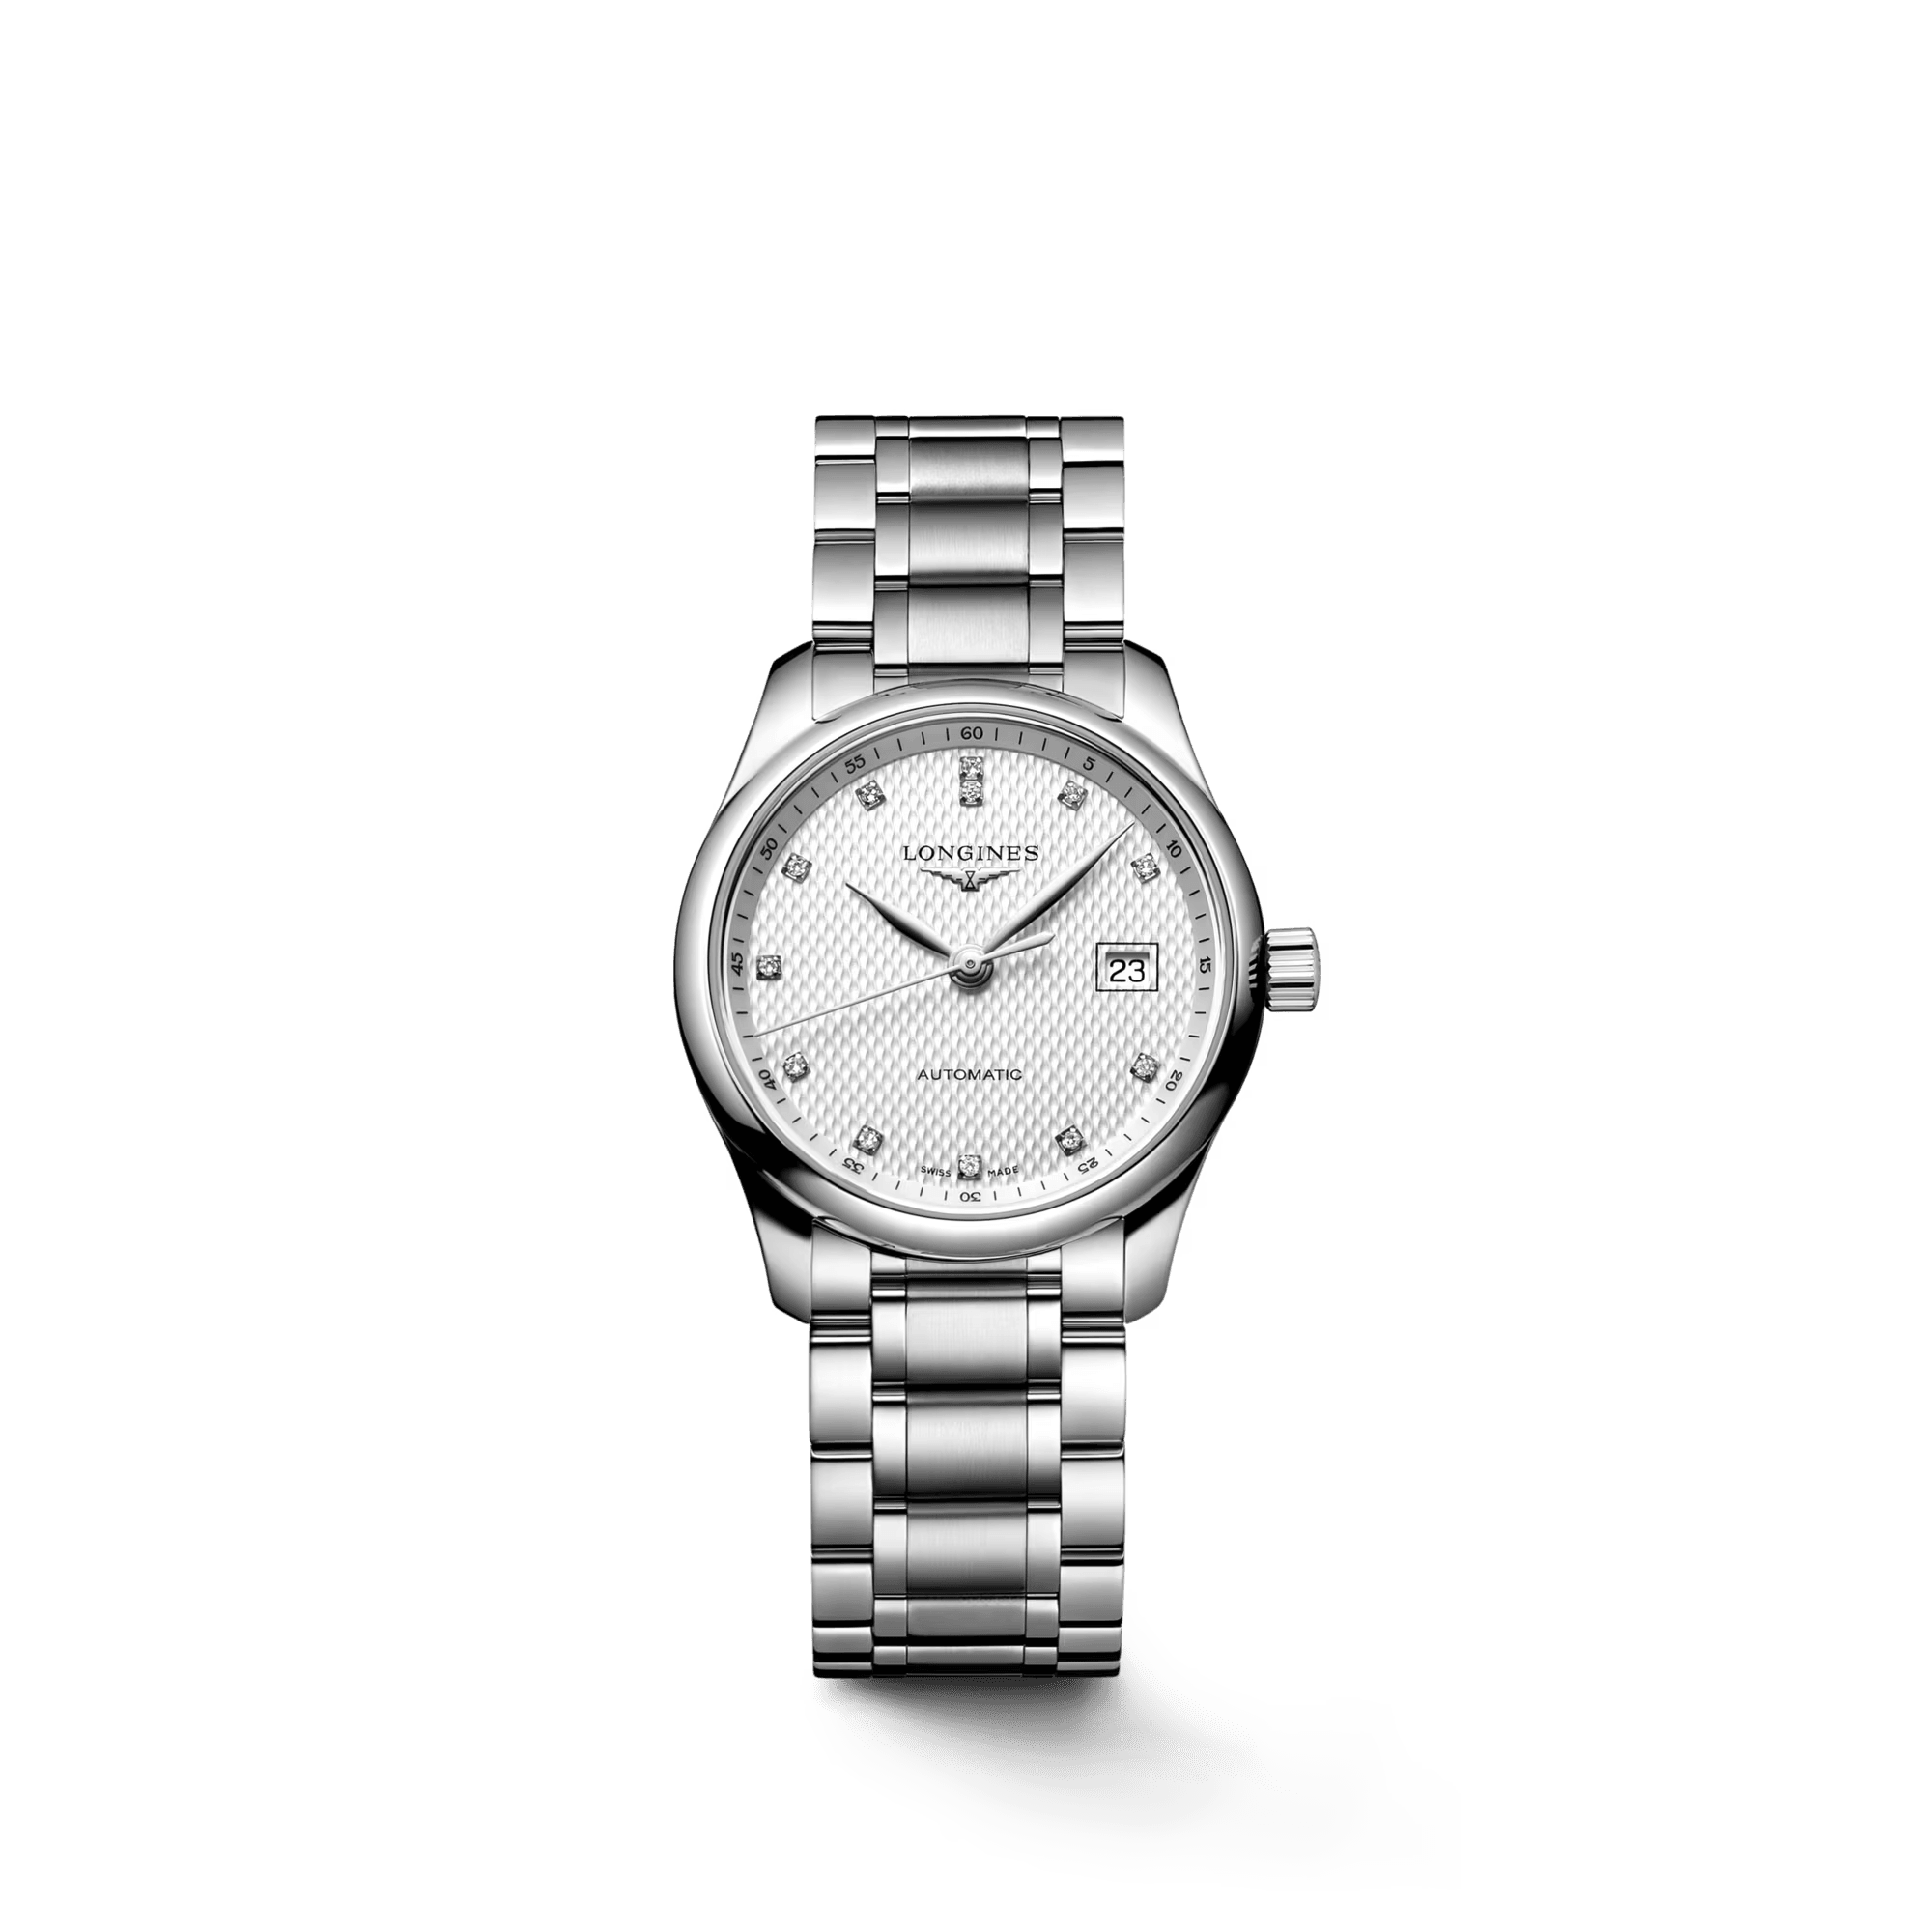 The Longines Master Collection Automatic Women's Watch L22574776